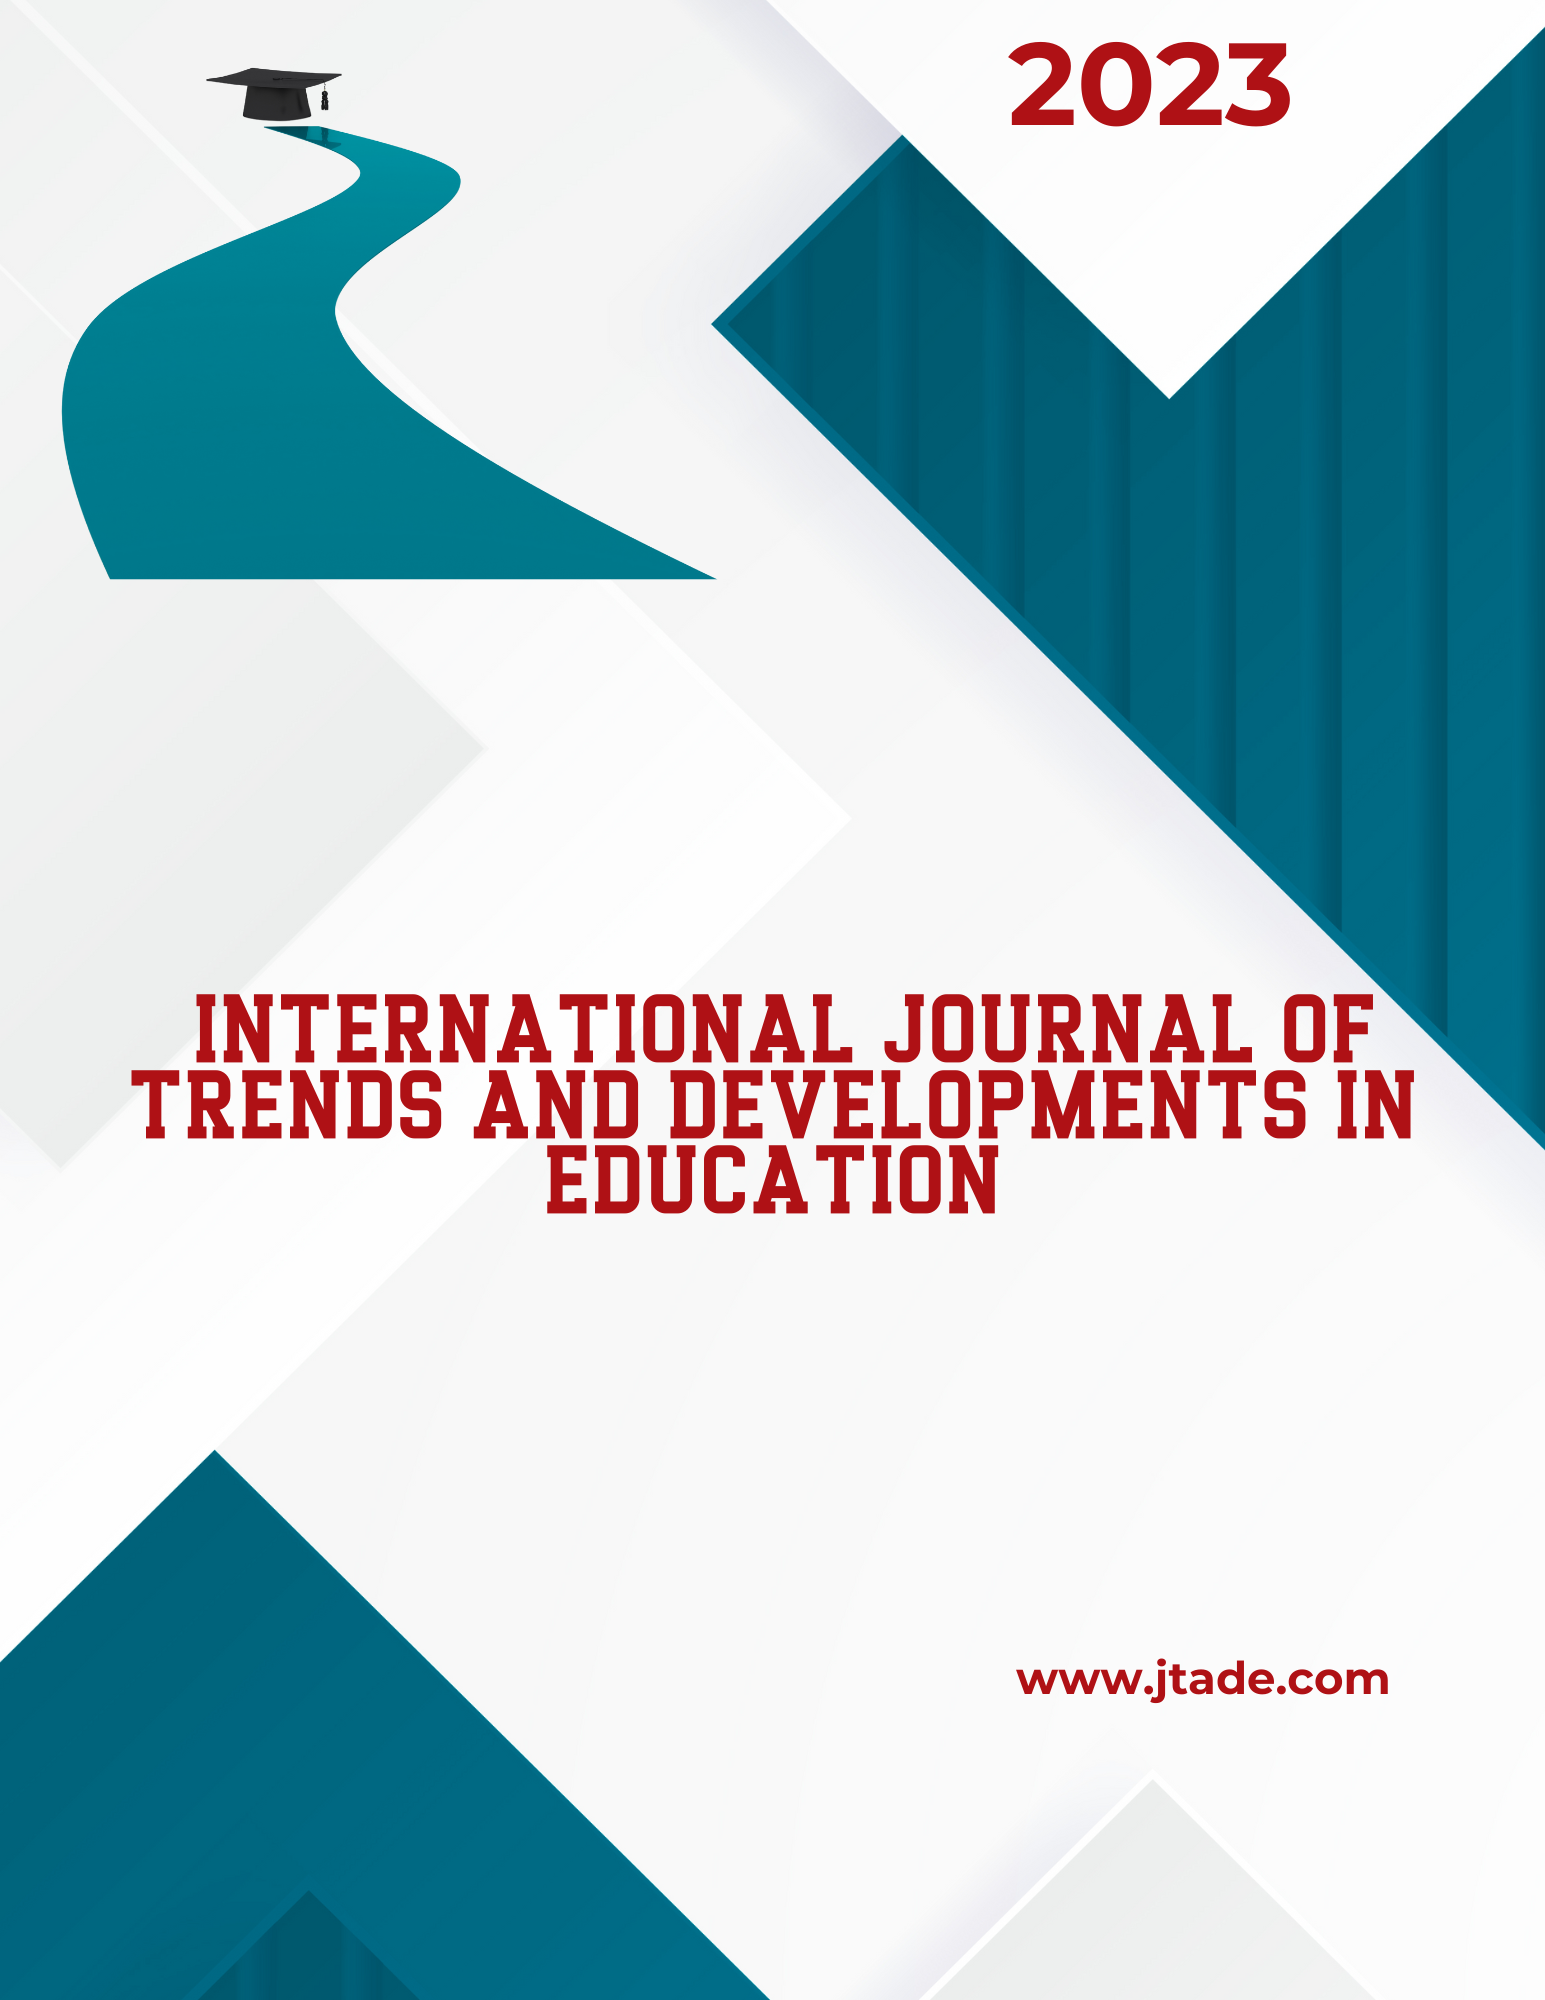 					View Vol. 3 No. 1 (2023): International Journal of Trends and Developments in Education	
				